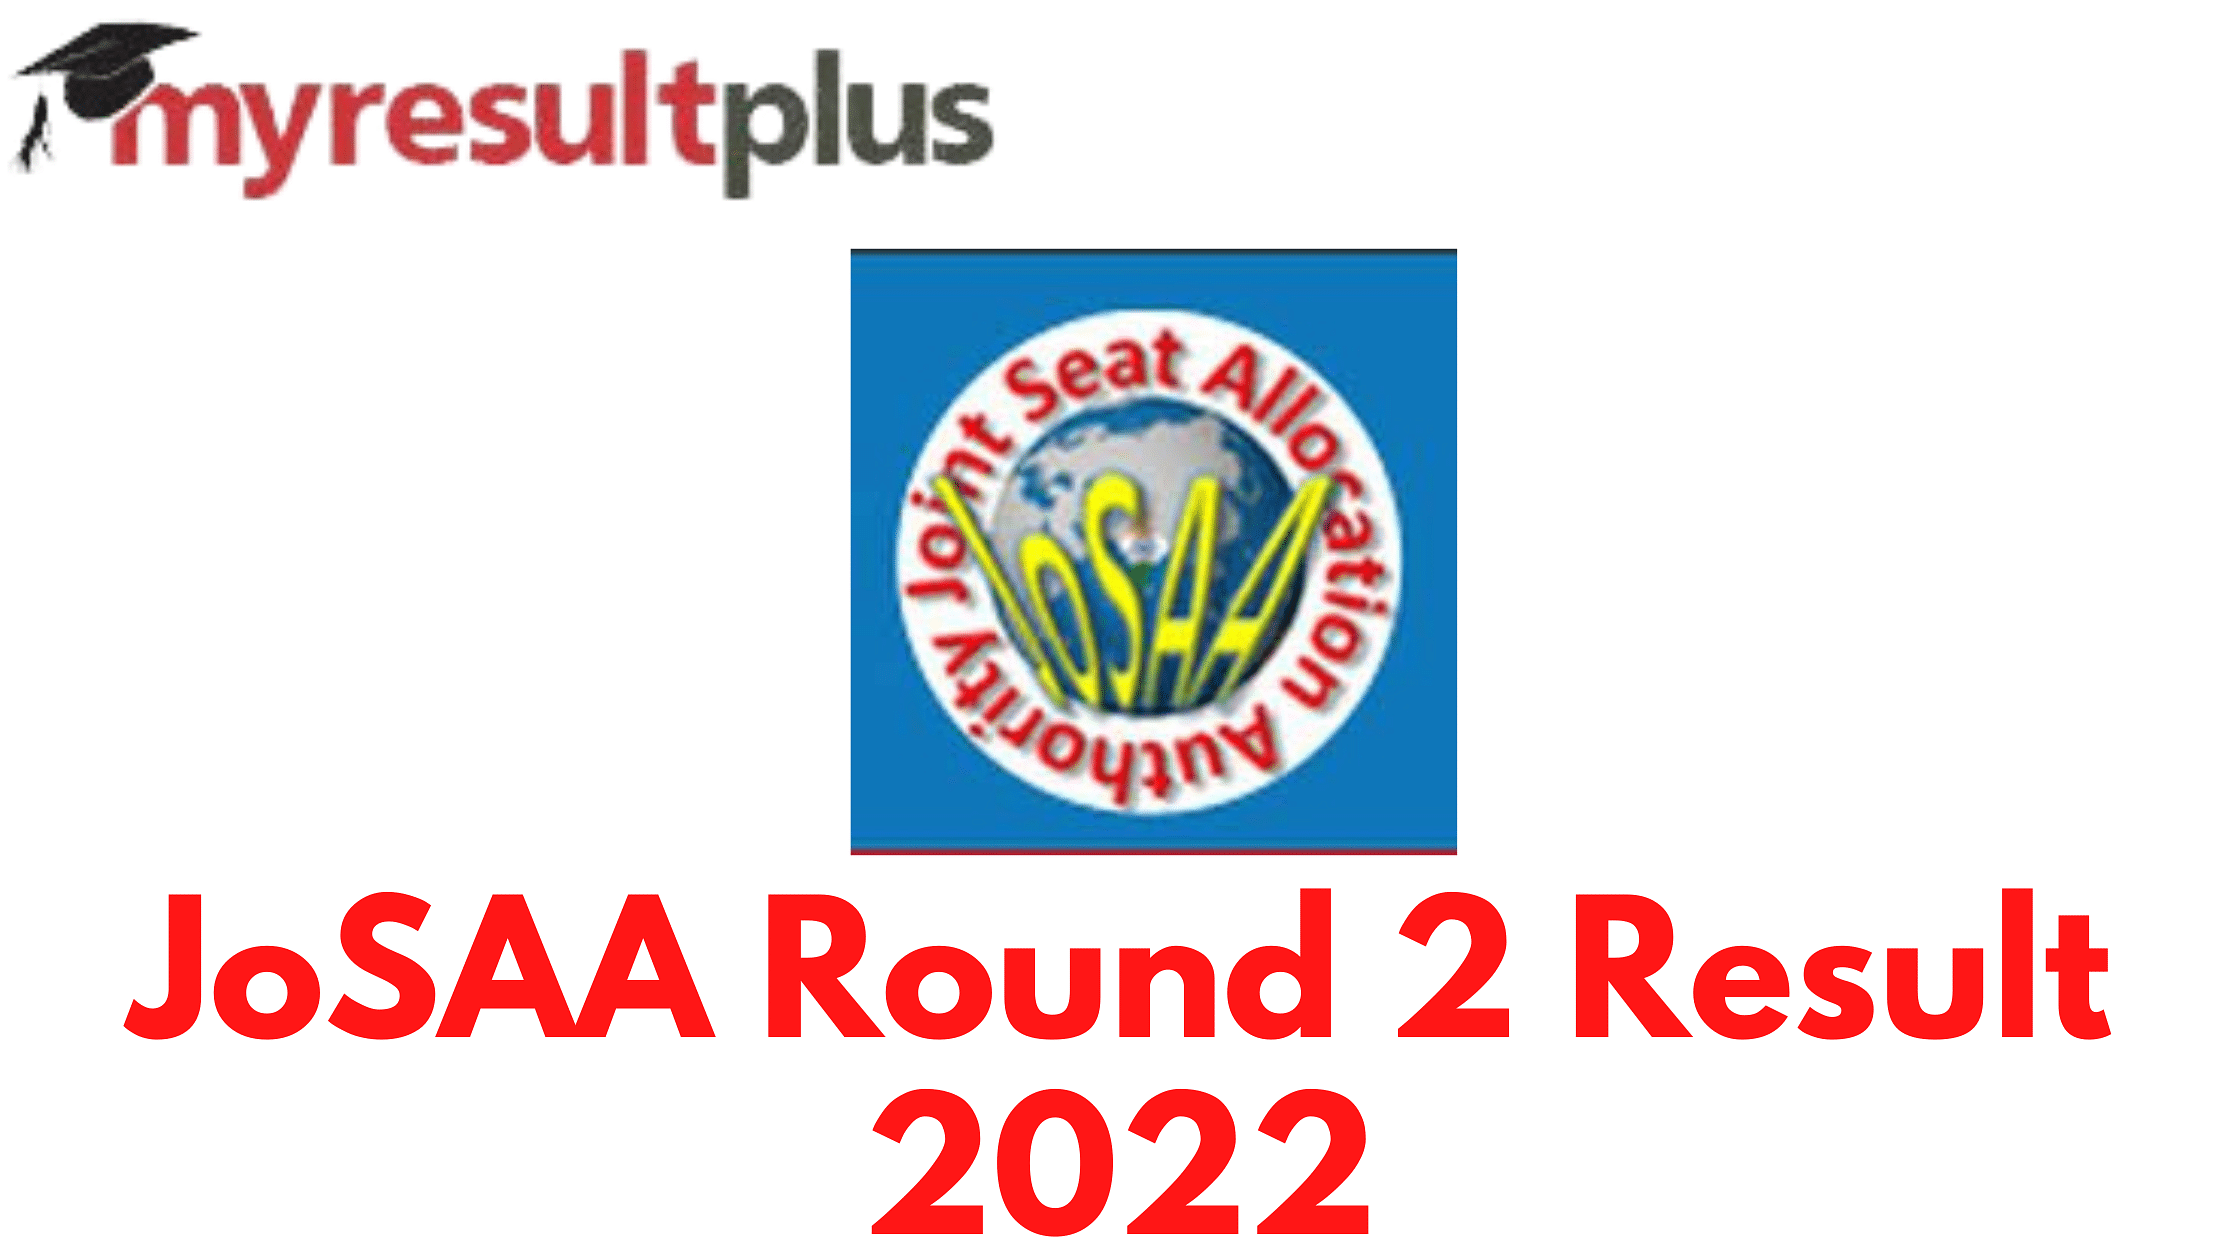 JoSAA 2022 Round 2 Result To Be Declared Tomorrow, Know How to Check Here